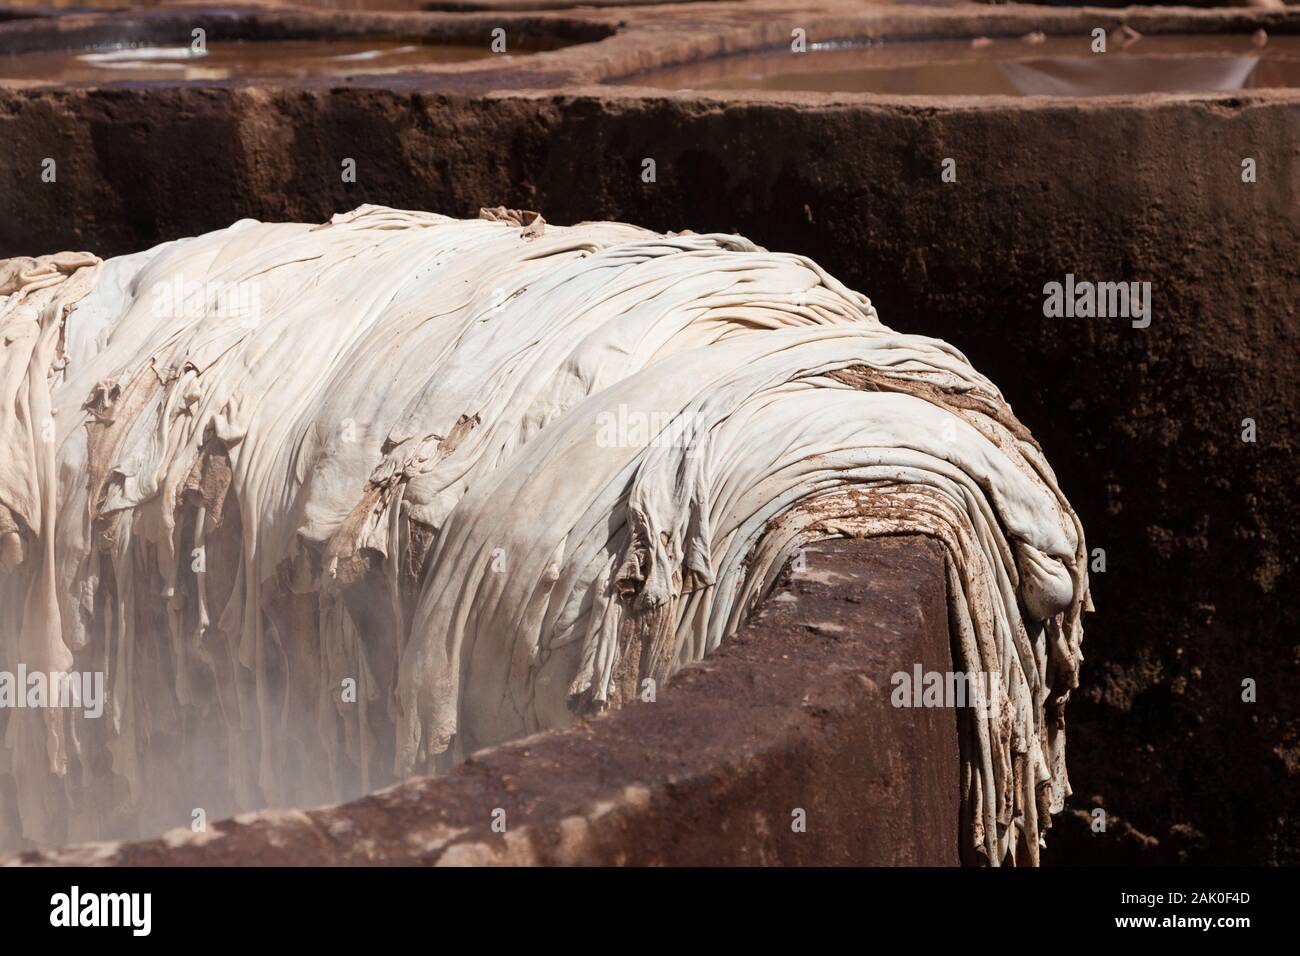 Animal skins (or hides) lying on the edge of stone vessel in the Chouara Tannery, Fes (Fez), Morocco Stock Photo